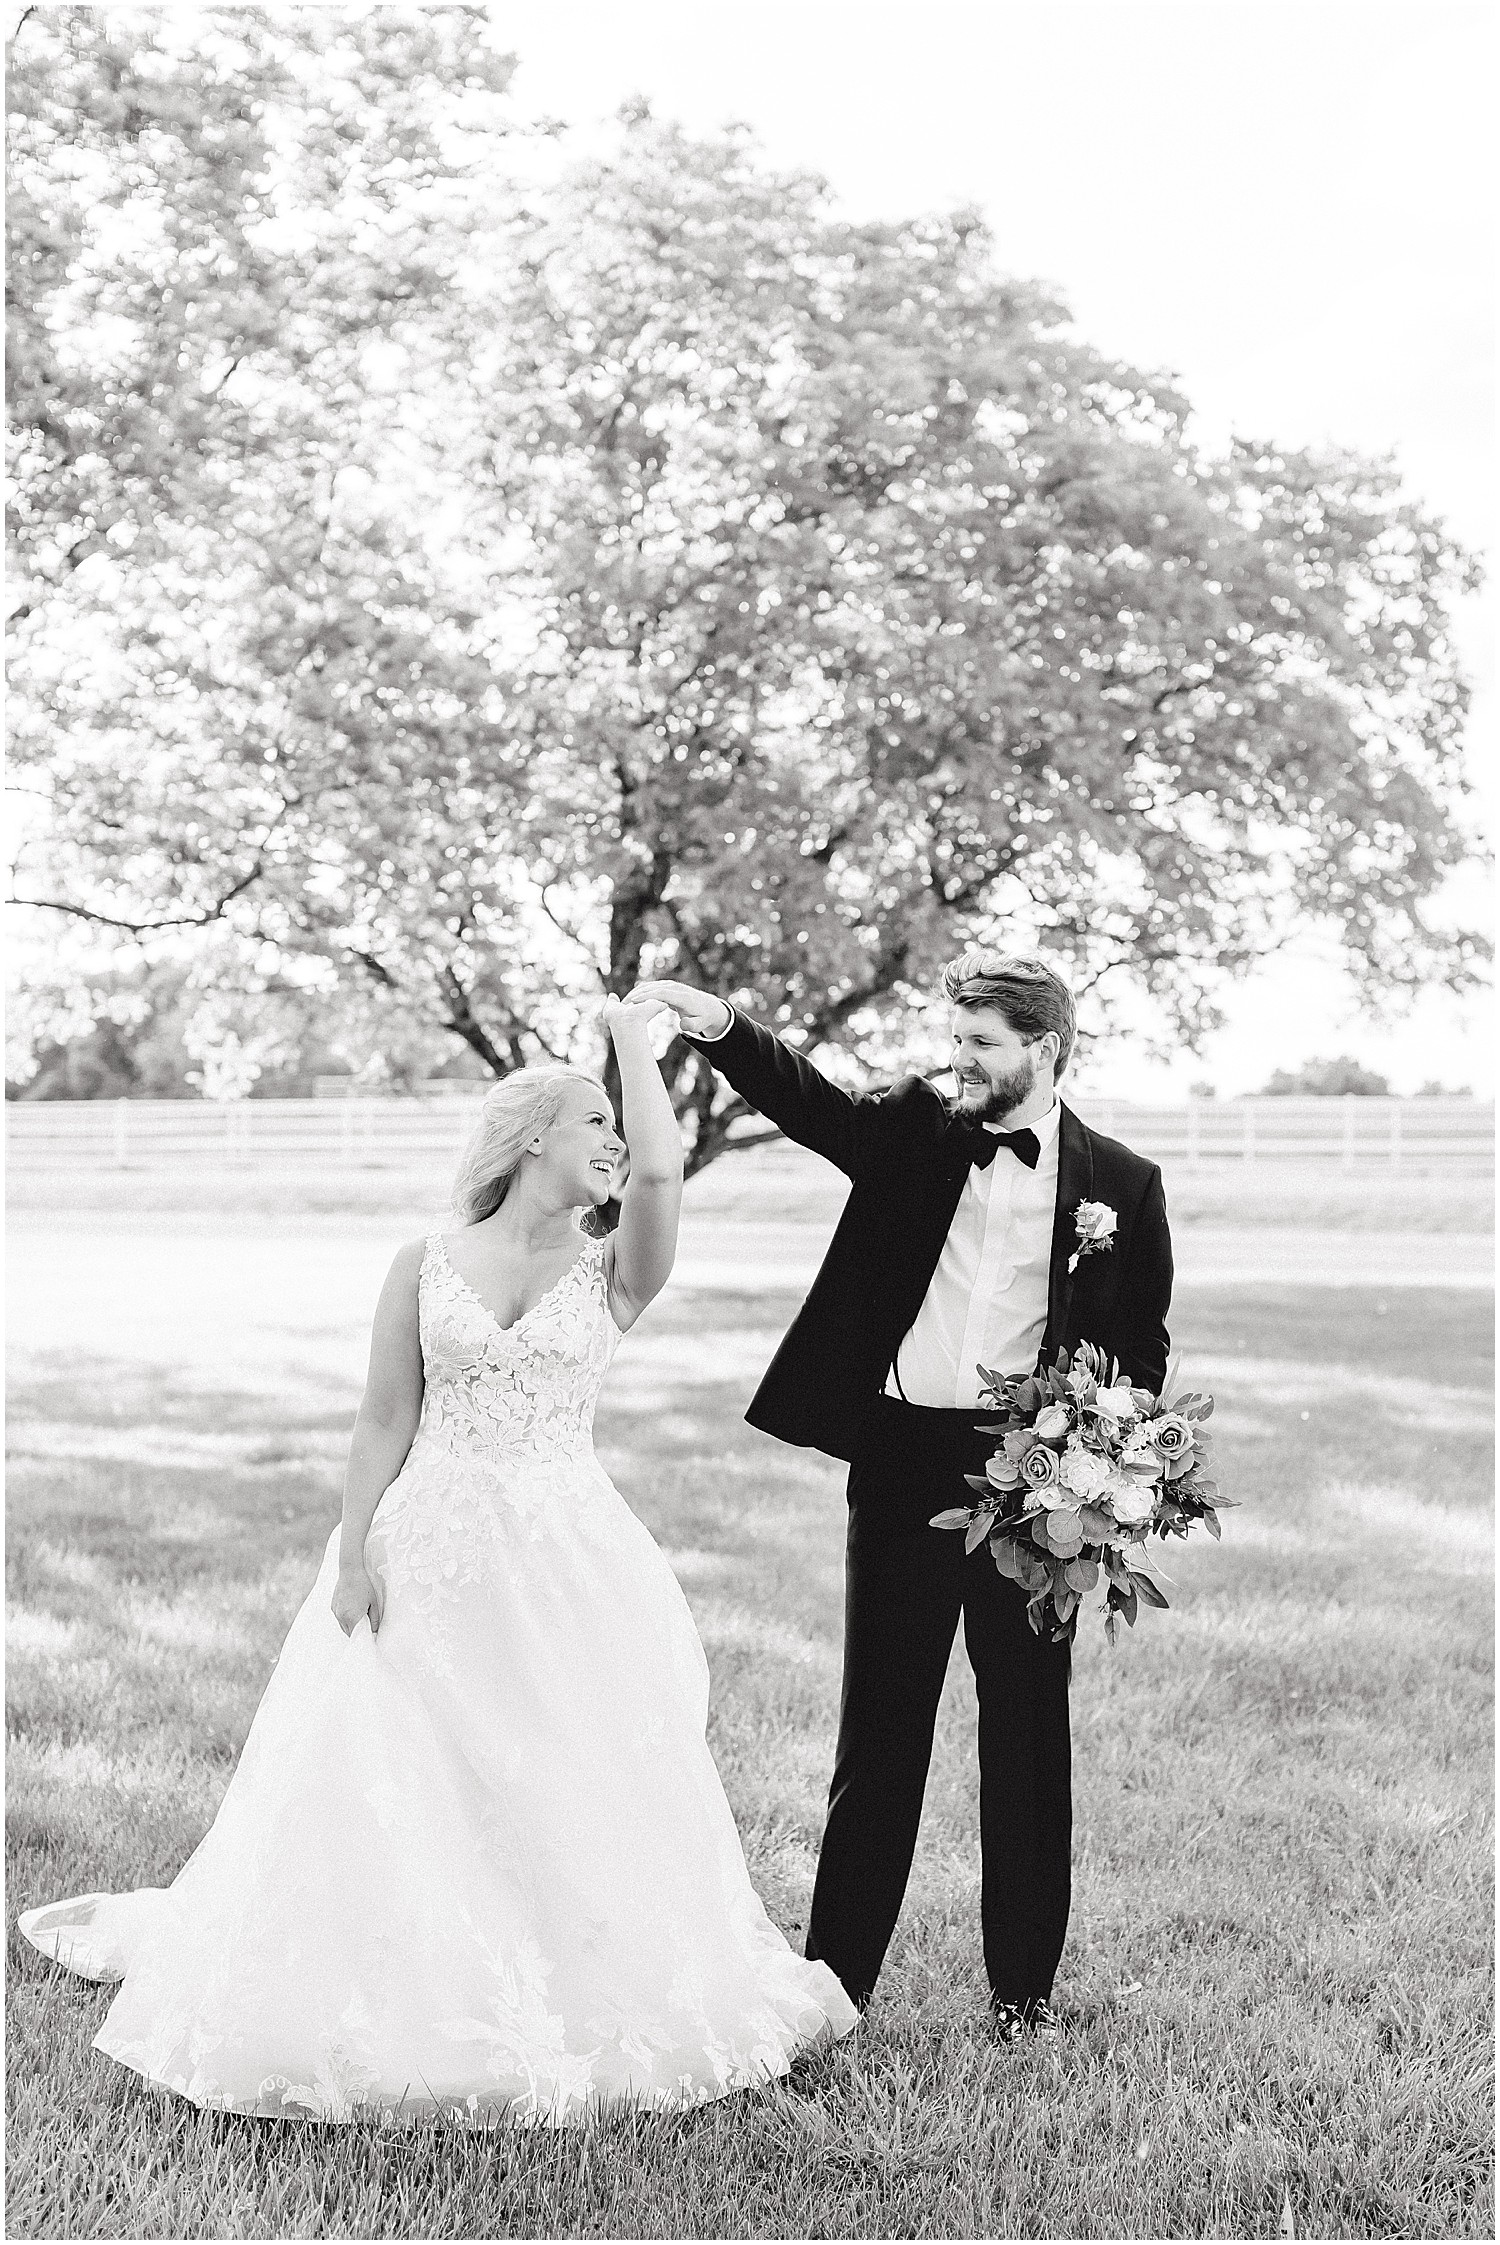 black and white image of bride and groom dancing under trees on wedding day